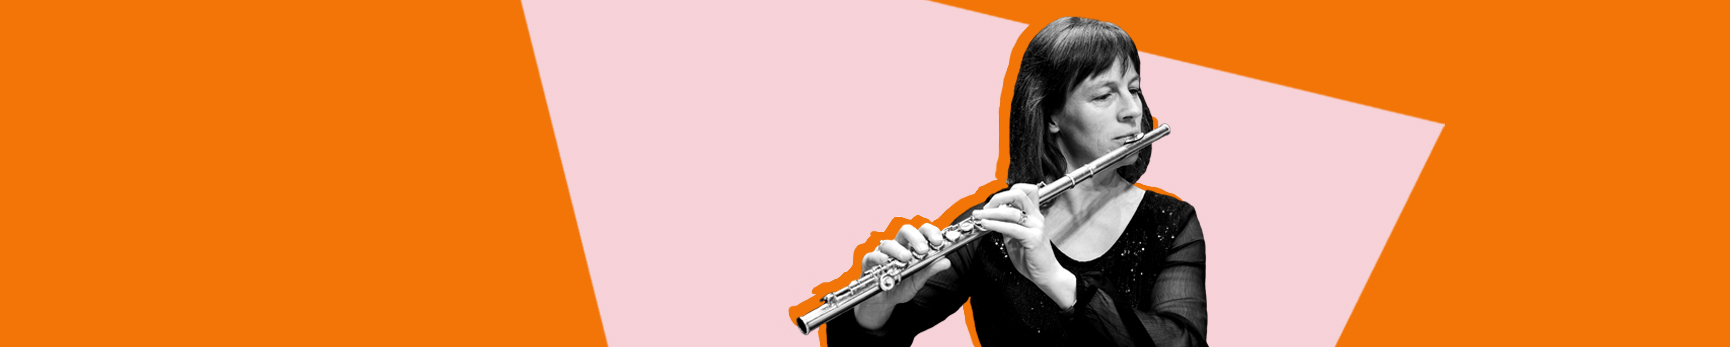 Black and white photograph of an orchestra member playing a flue against a light pink and orange background